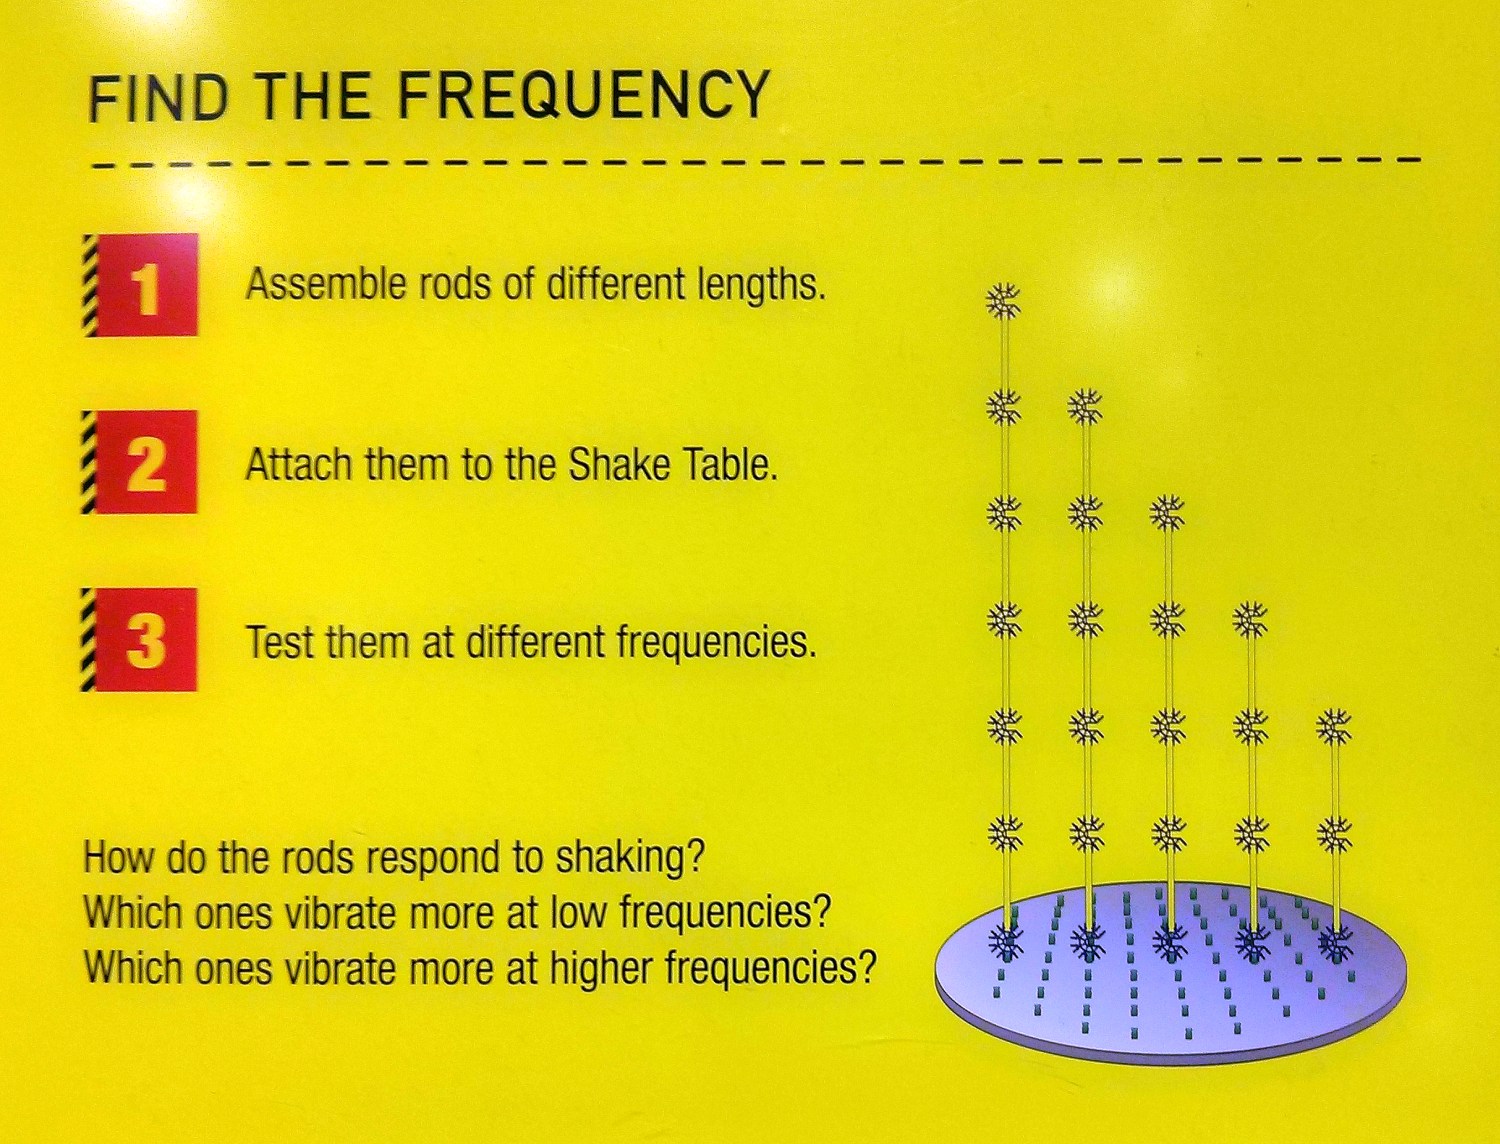 perot-museum-building-vibration-panel1-frequencies.jpg